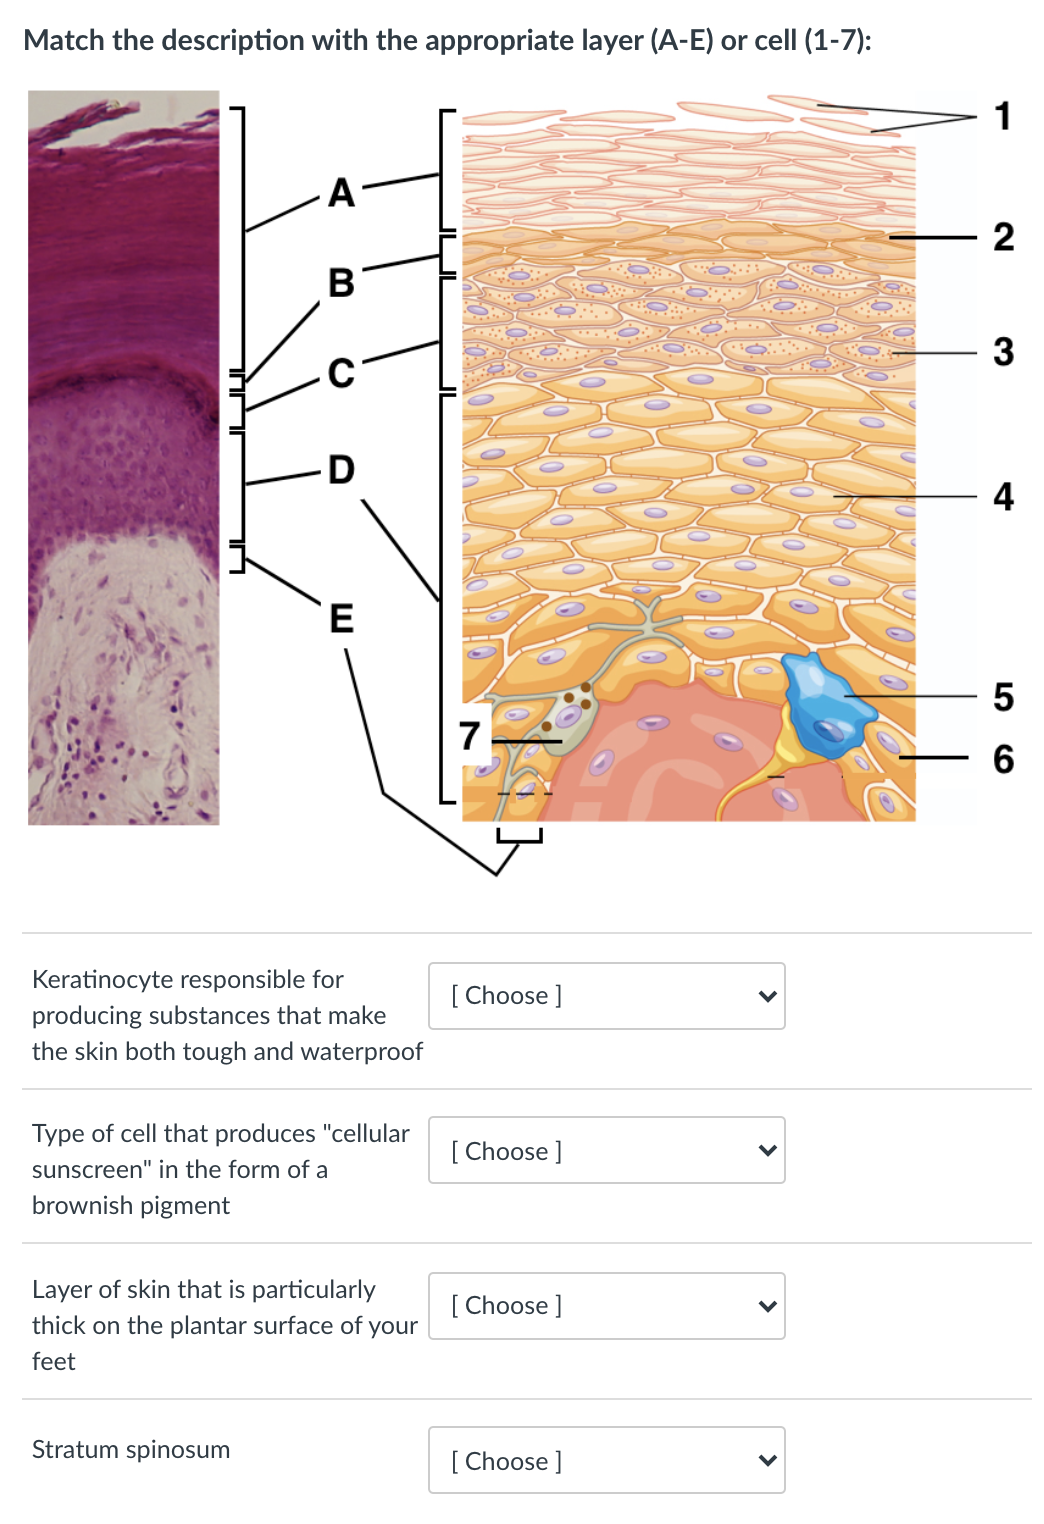 Match the description with the appropriate layer (A-E) or cell (1-7):
1
A
2
3
D
4
7
Keratinocyte responsible for
producing substances that make
the skin both tough and waterproof
[ Choose ]
Type of cell that produces "cellular
[ Choose ]
sunscreen" in the form of a
brownish pigment
Layer of skin that is particularly
[ Choose ]
thick on the plantar surface of your
feet
Stratum spinosum
[ Choose ]
LO
>
>
>
